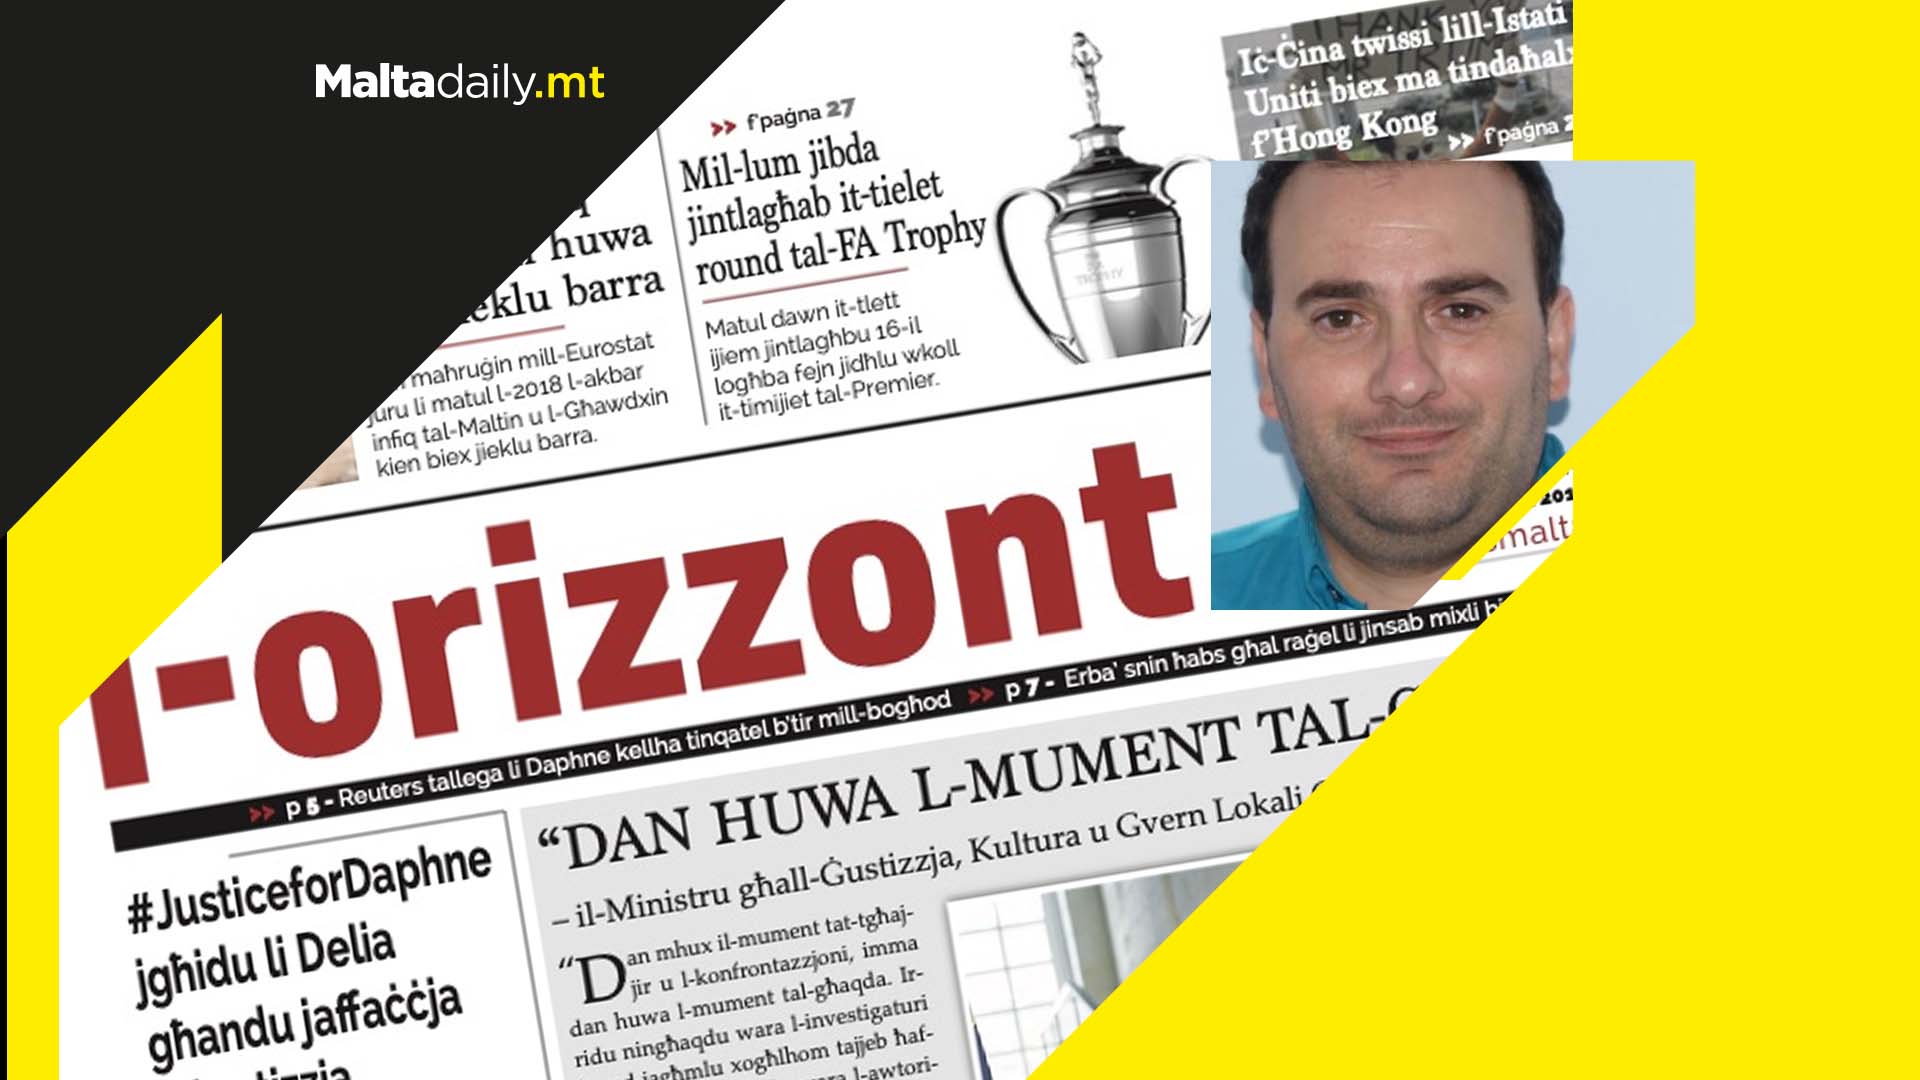 Orizzont editor Victor Vella suspended follow social injustice reporting